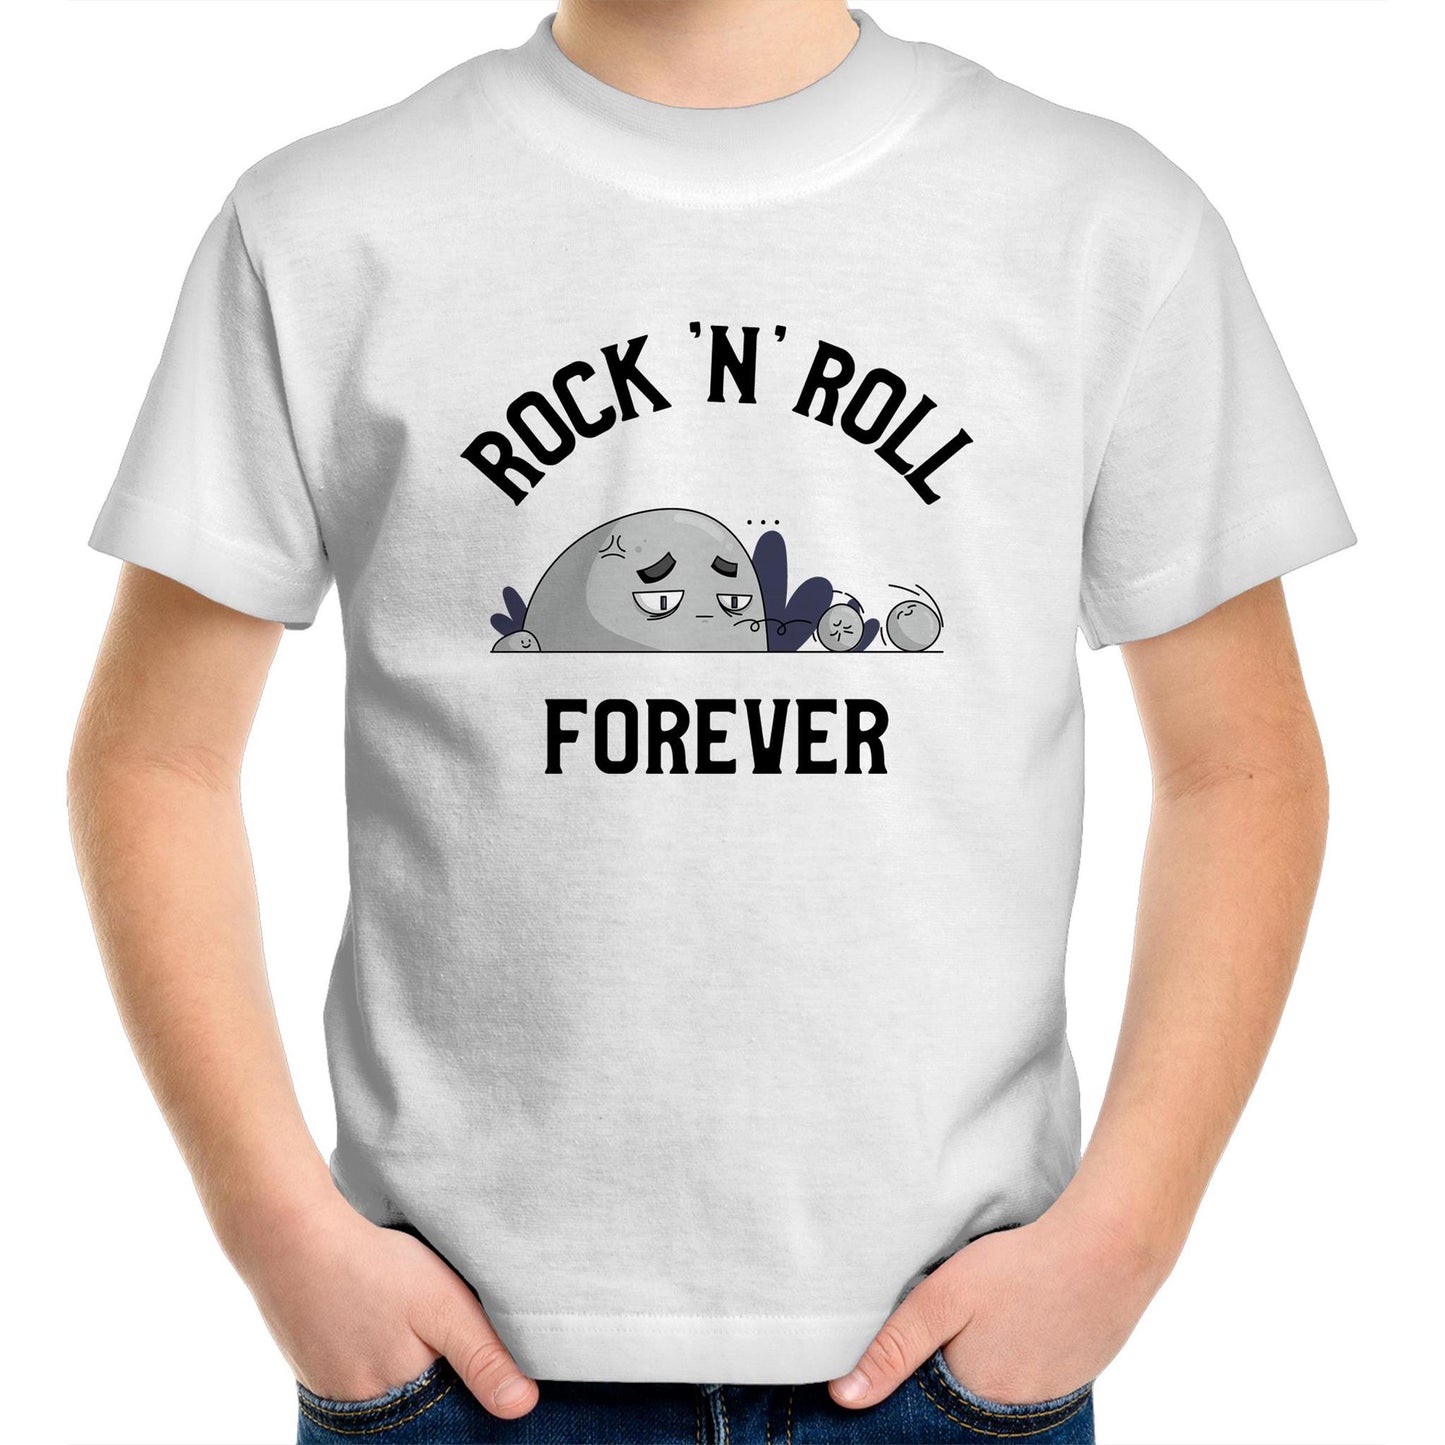 Rock 'N' Roll Forever - Kids Youth T-Shirt White Kids Youth T-shirt Music